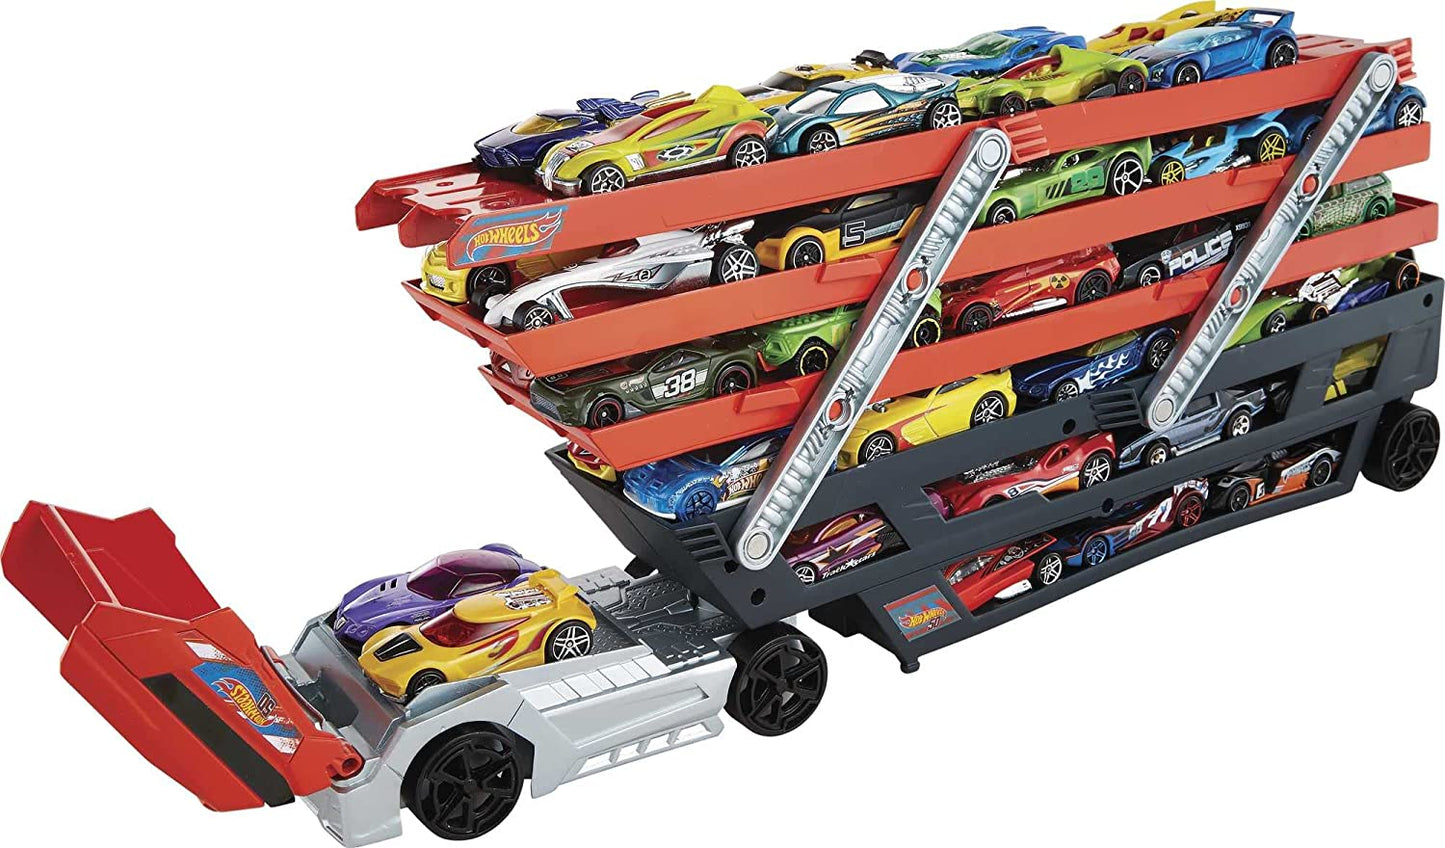 Hot Wheels Plastic Mega Hauler Truck, Stores More Than 50 Cars | Age :  3 Years + by Mattel